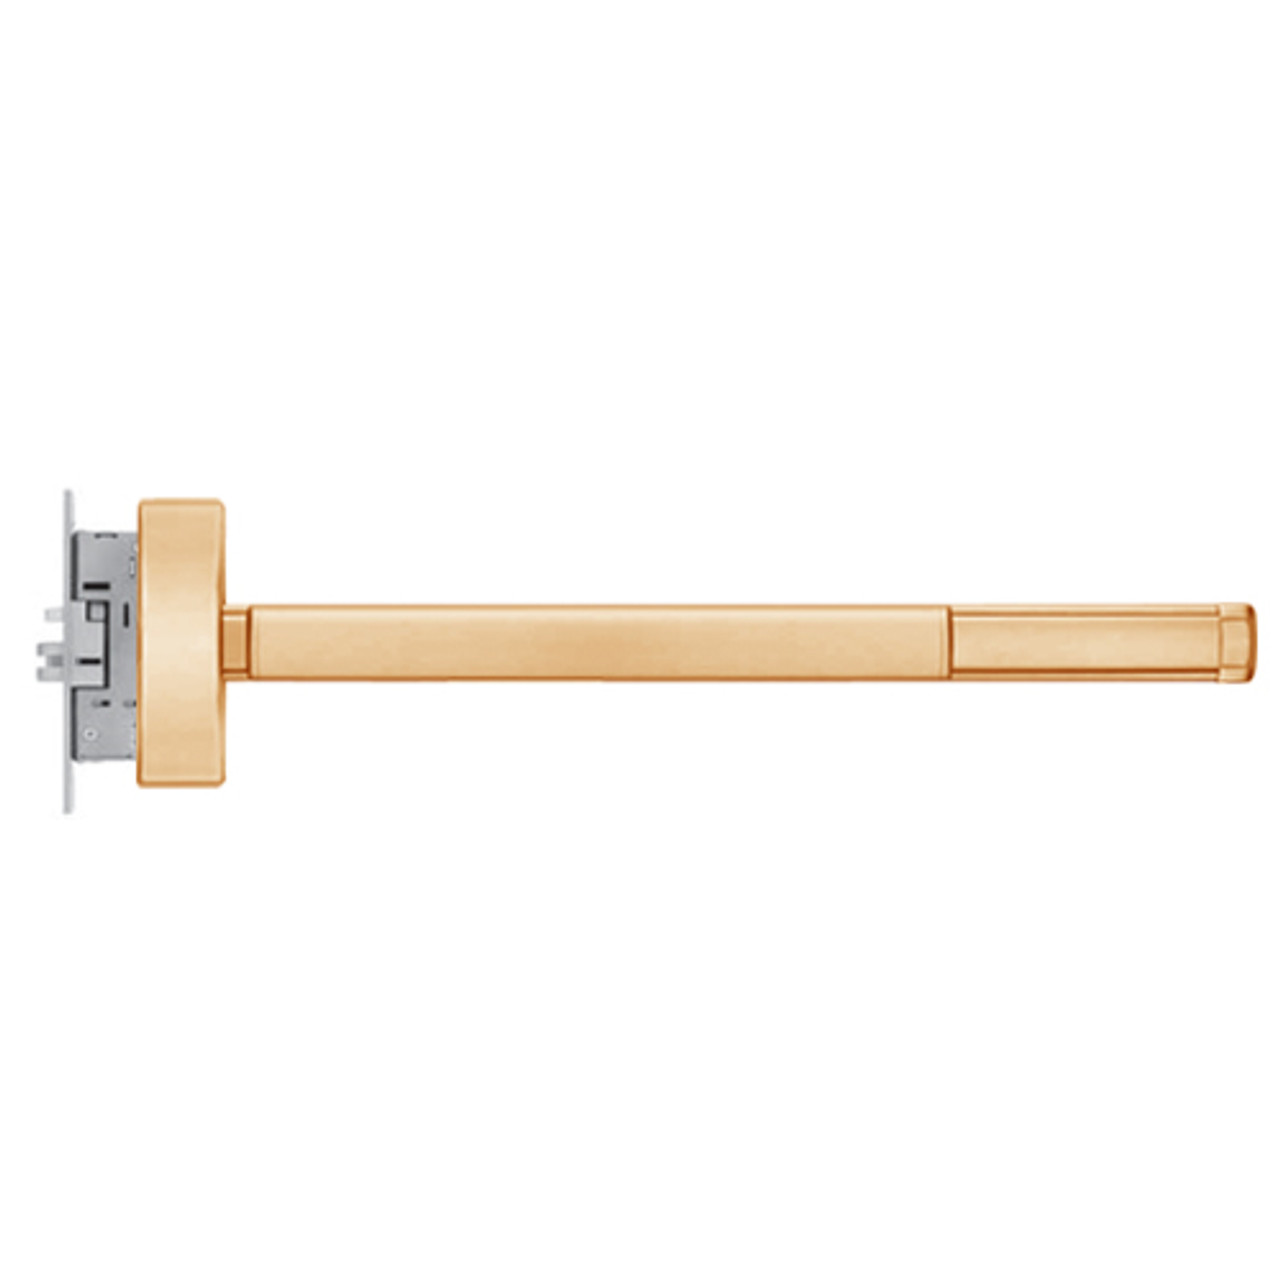 MLRFL2314-LHR-612-48 PHI 2300 Series Fire Rated Apex Mortise Exit Device with Motorized Latch Retraction Prepped for Lever-Knob Always Active in Satin Bronze Finish